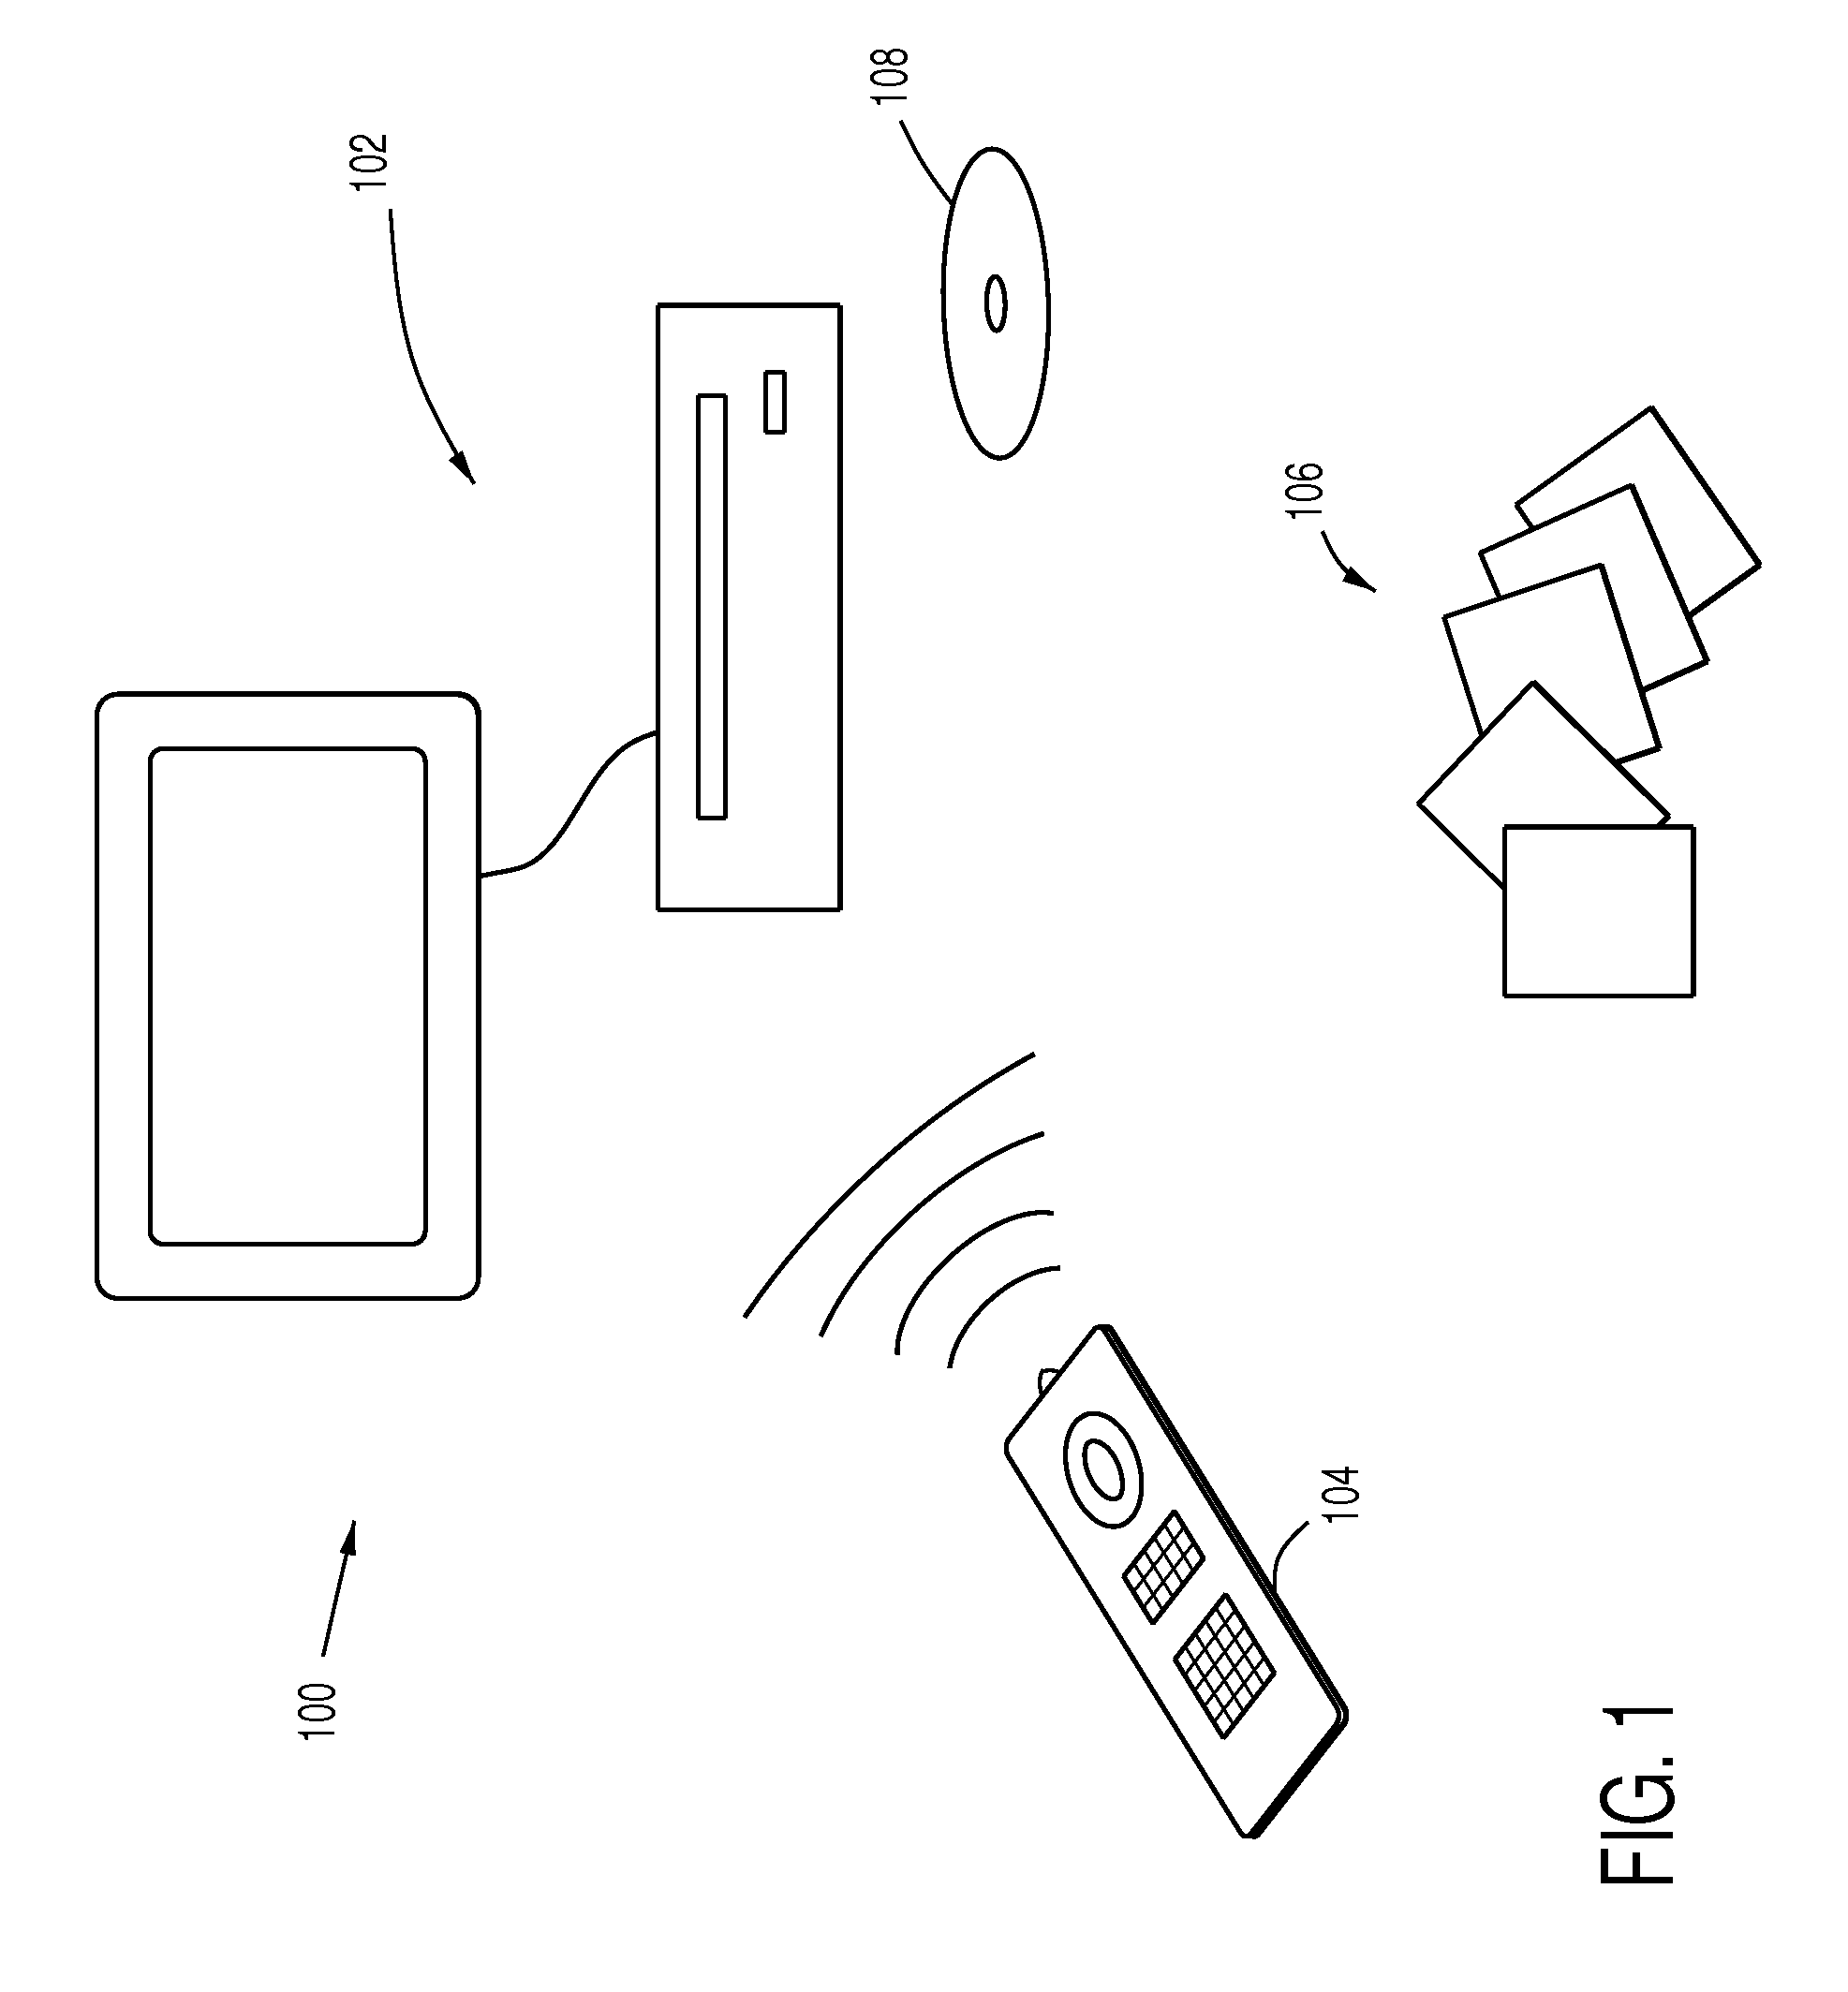 Ethnic awareness education game system and method